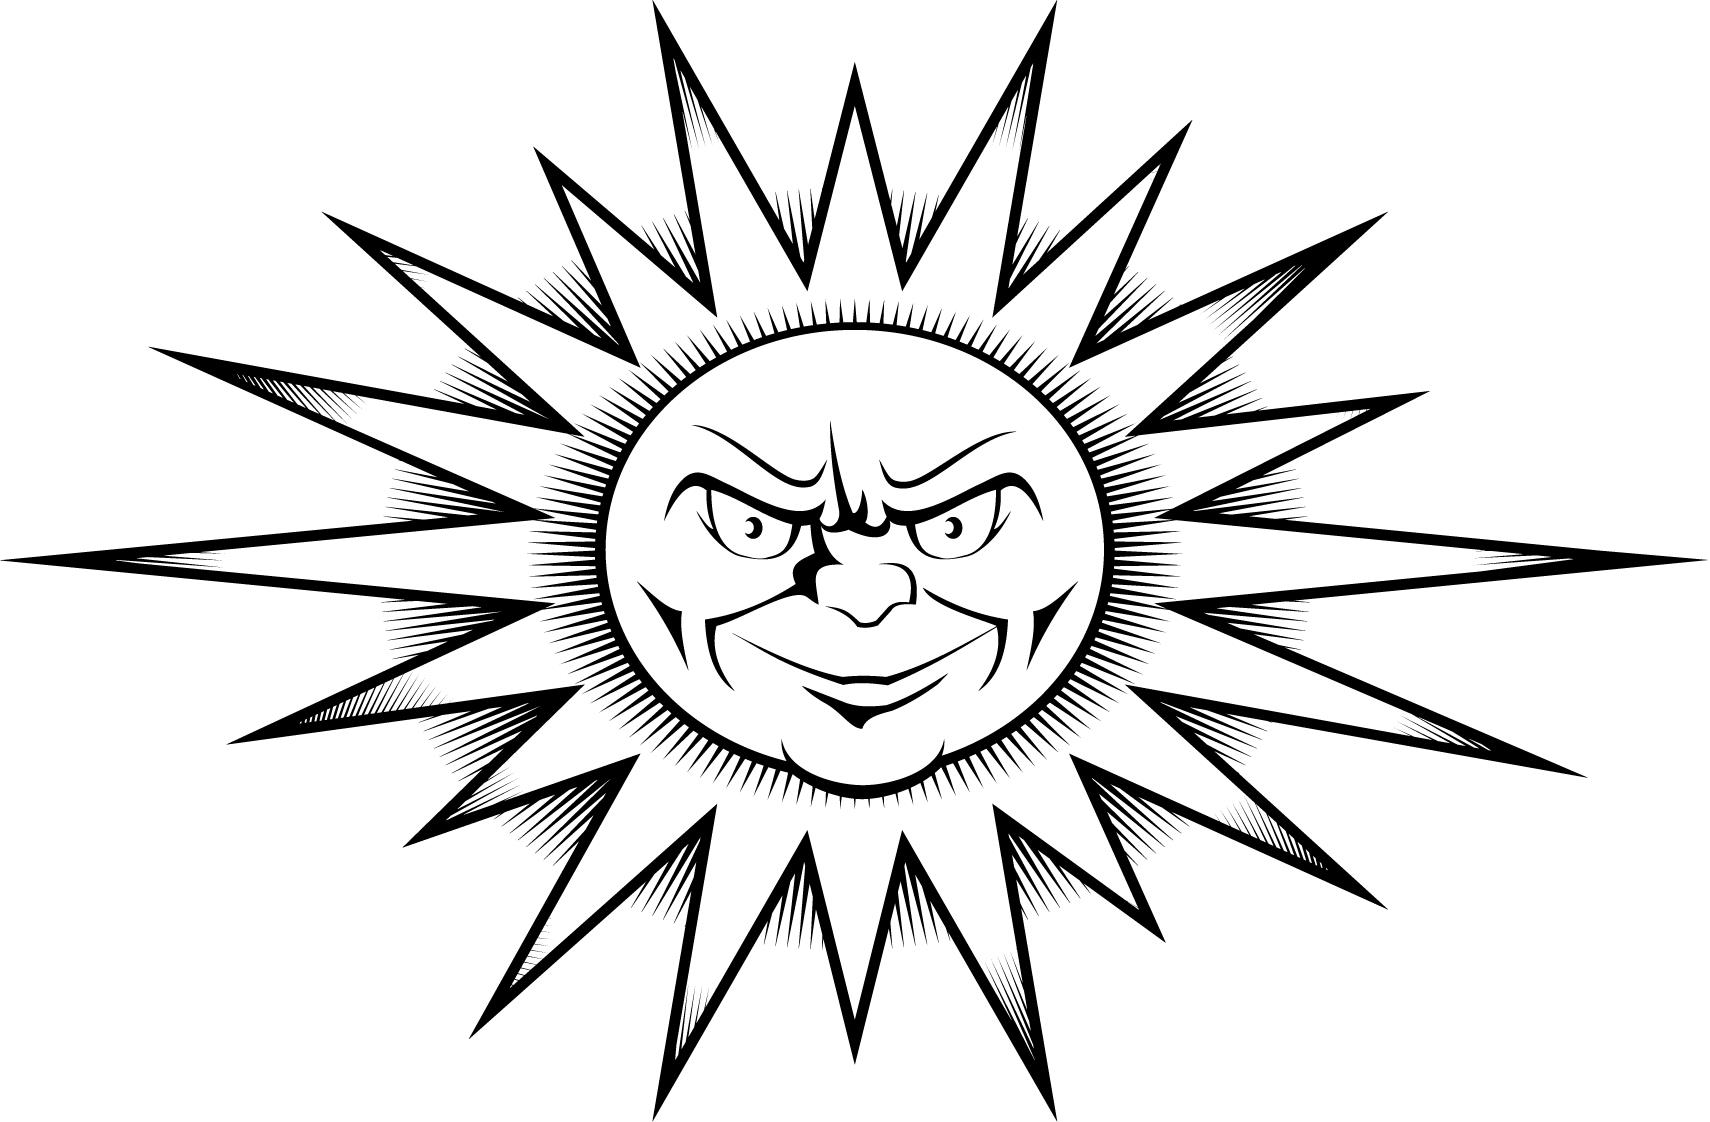 worksheet of a sun tattoo design printable - Coloring Point ...